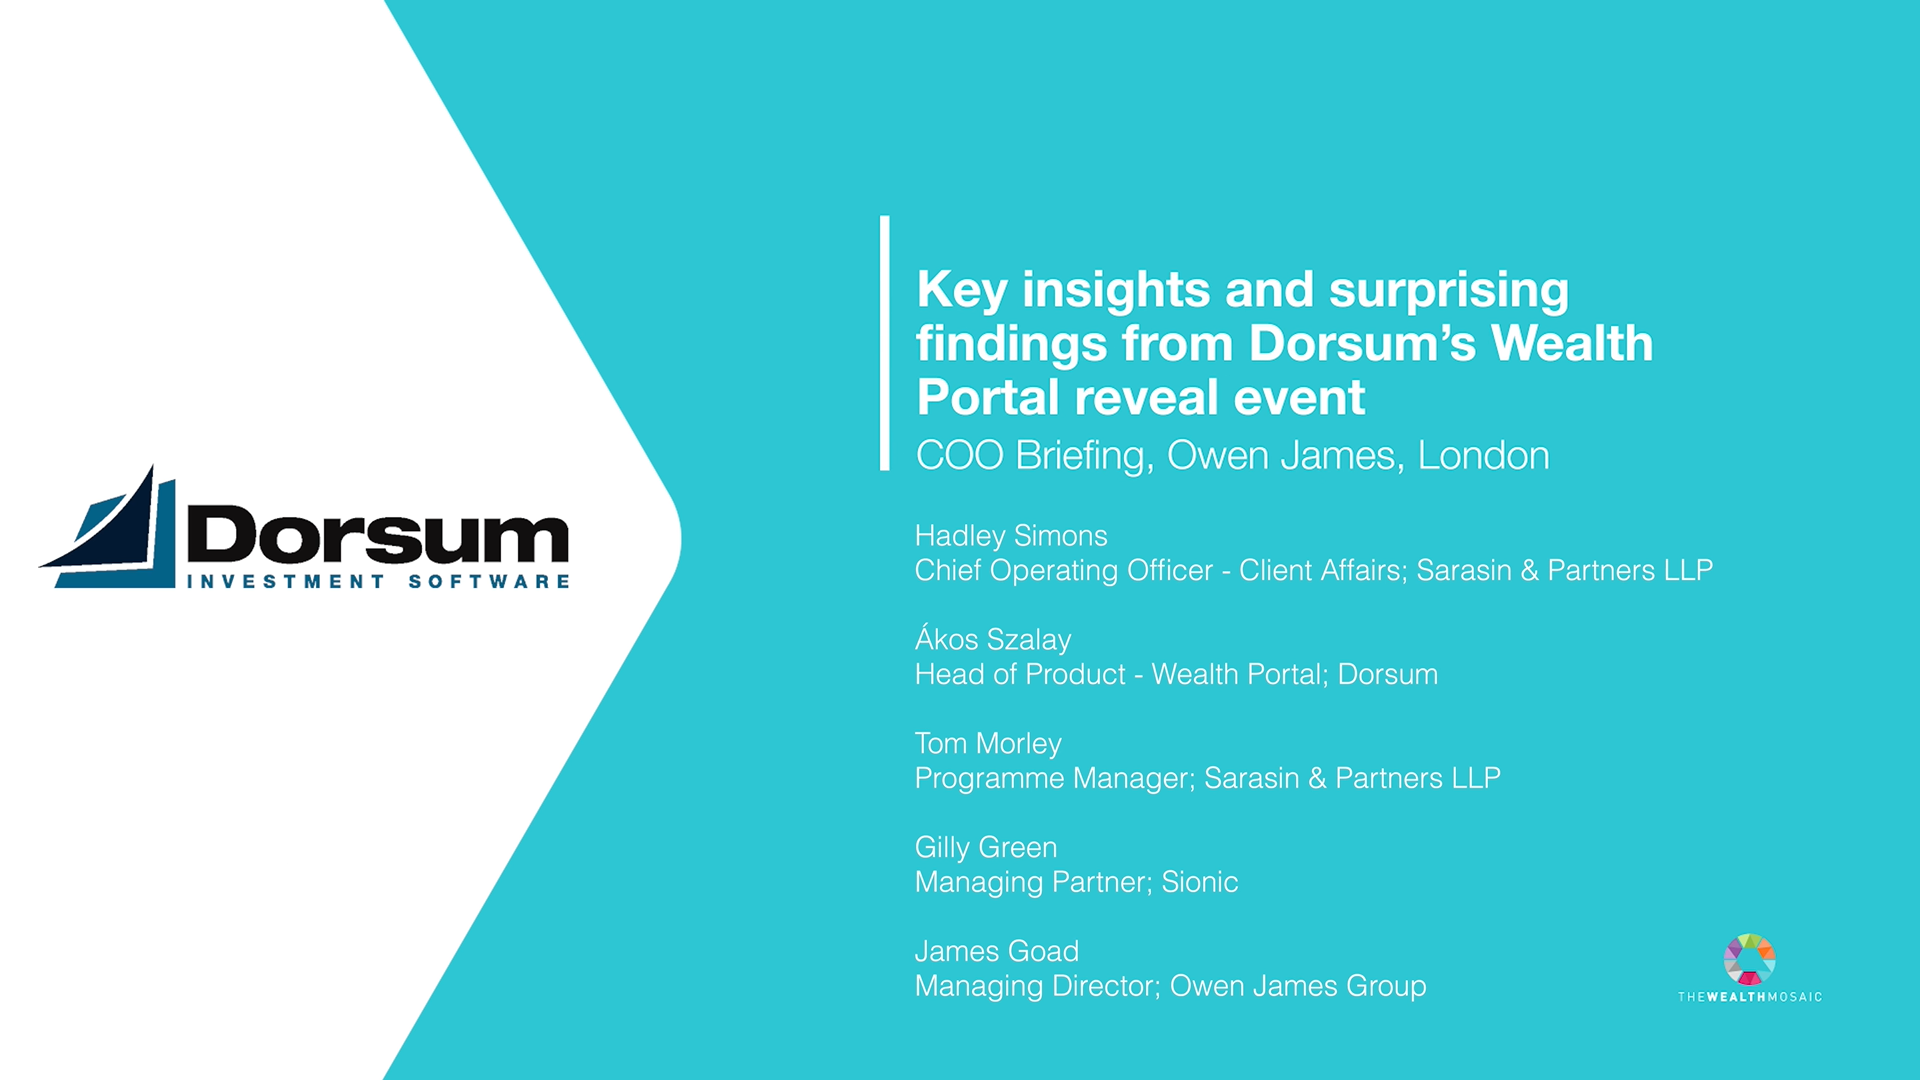 Key insights and surprising findings from Dorsum’s ‘Sarasin Client Portal’ reveal event (COO briefing, London)